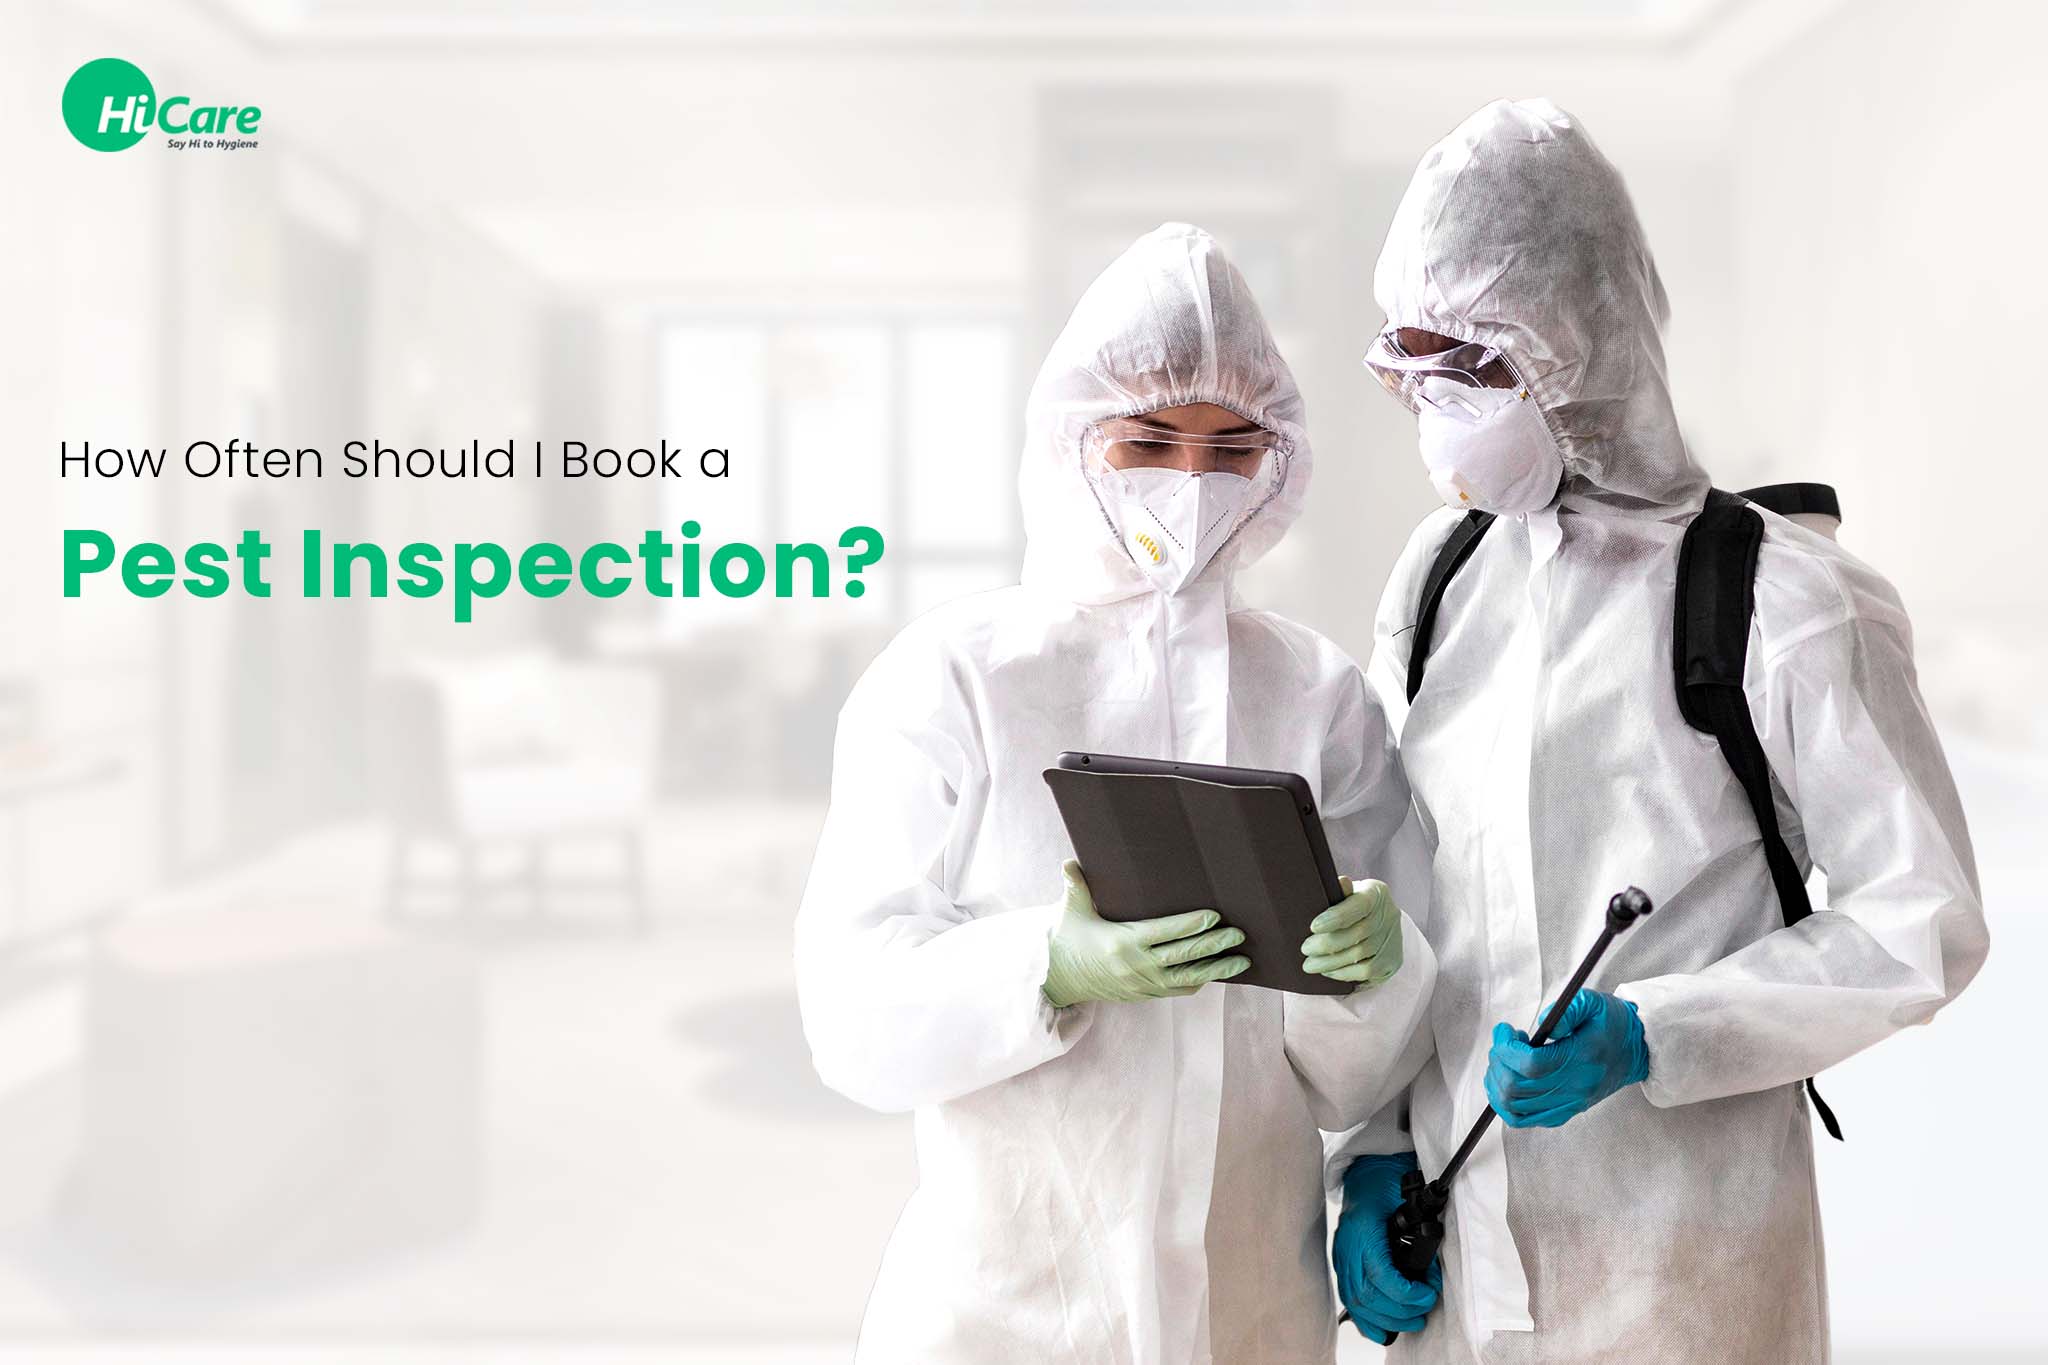 How Often Should I Book a Pest Inspection?